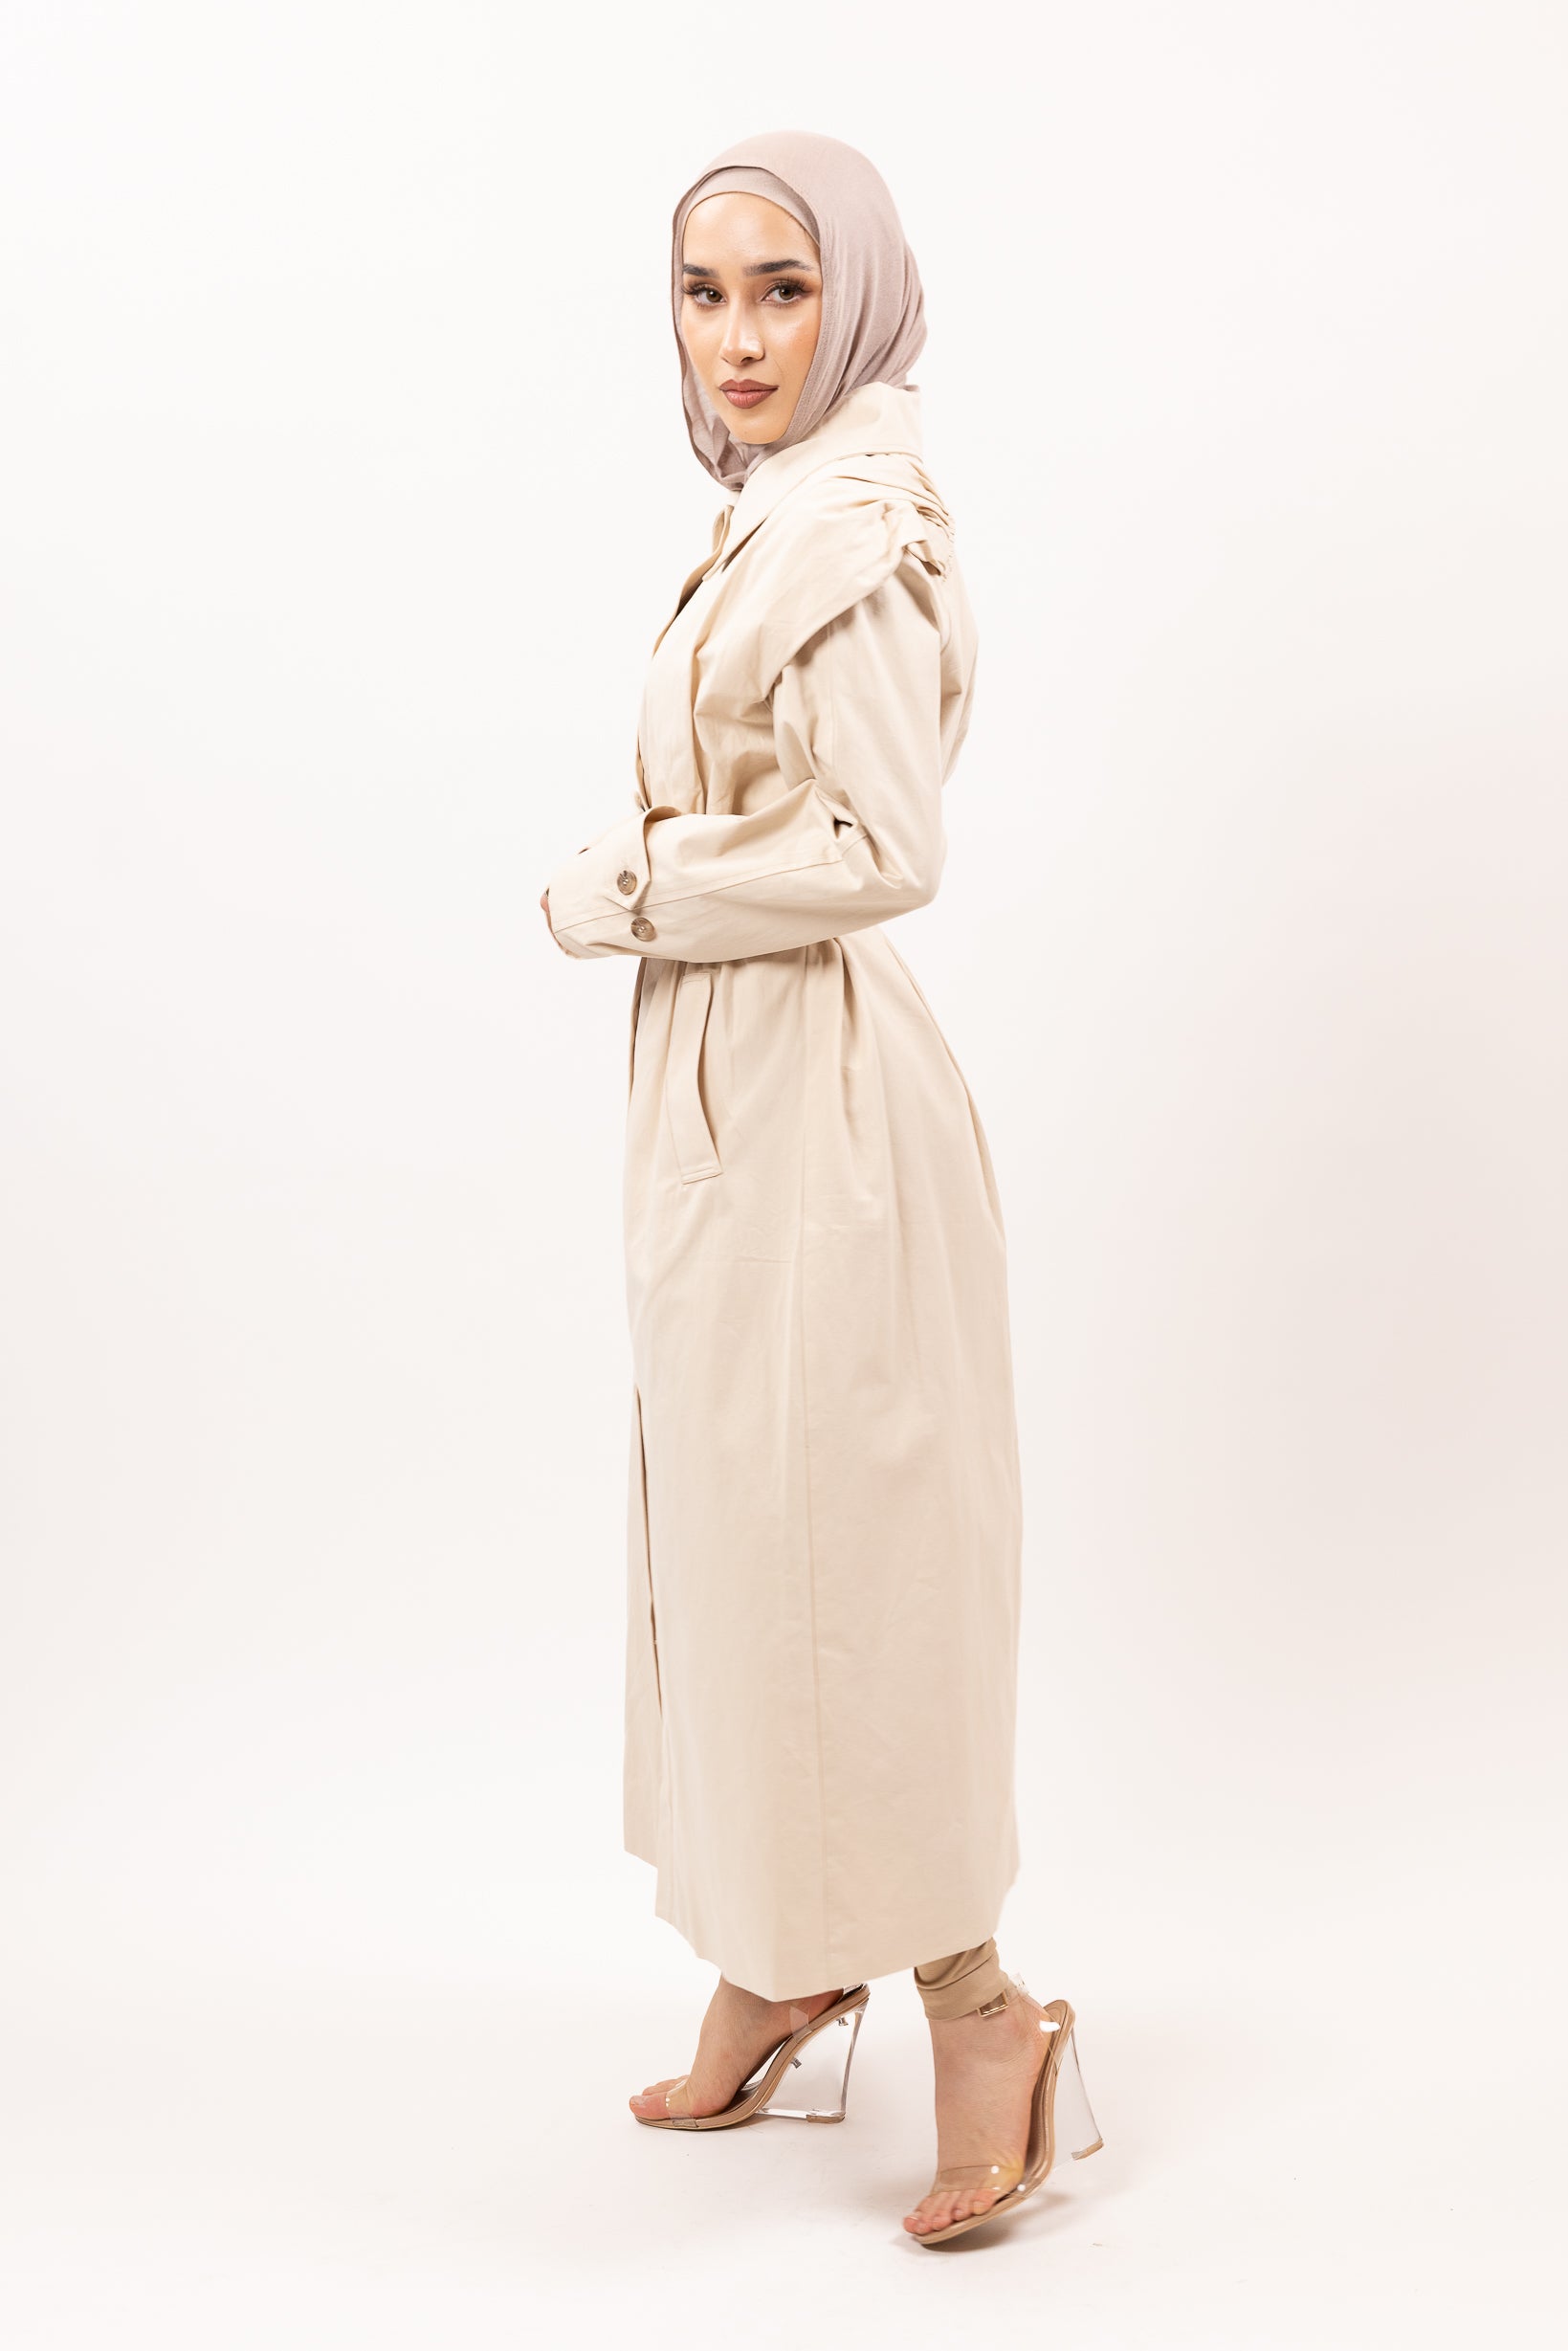 M8459Nude-trench